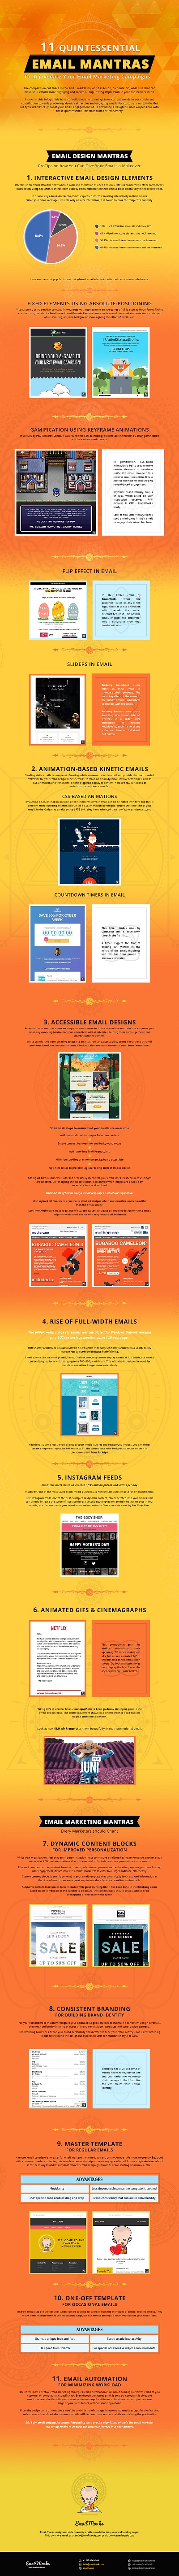 Email marketing and Design Mantras